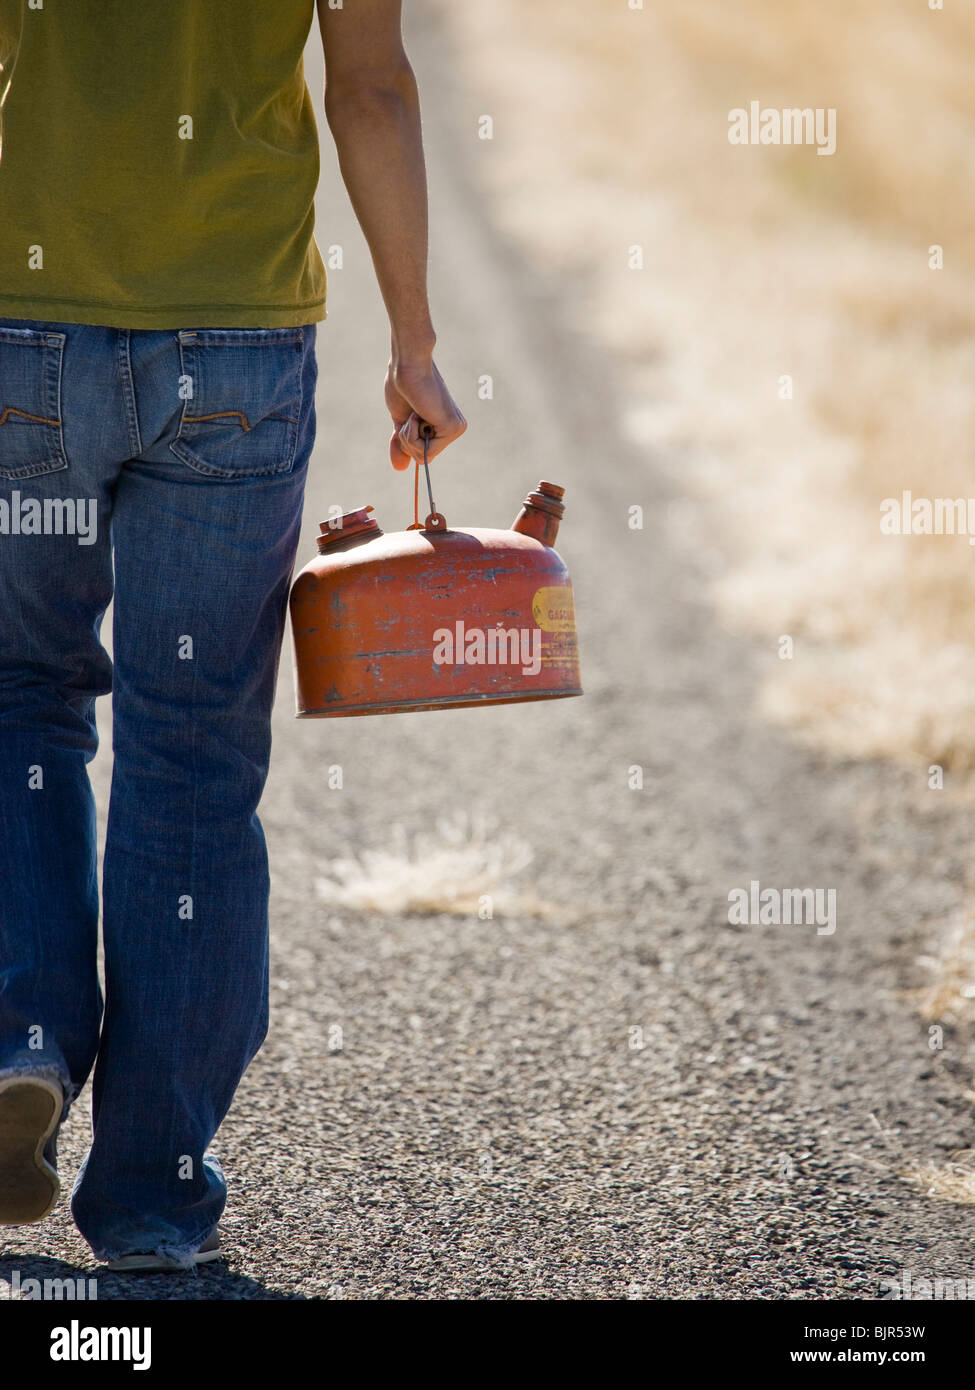 man walking with a gas can Stock Photo